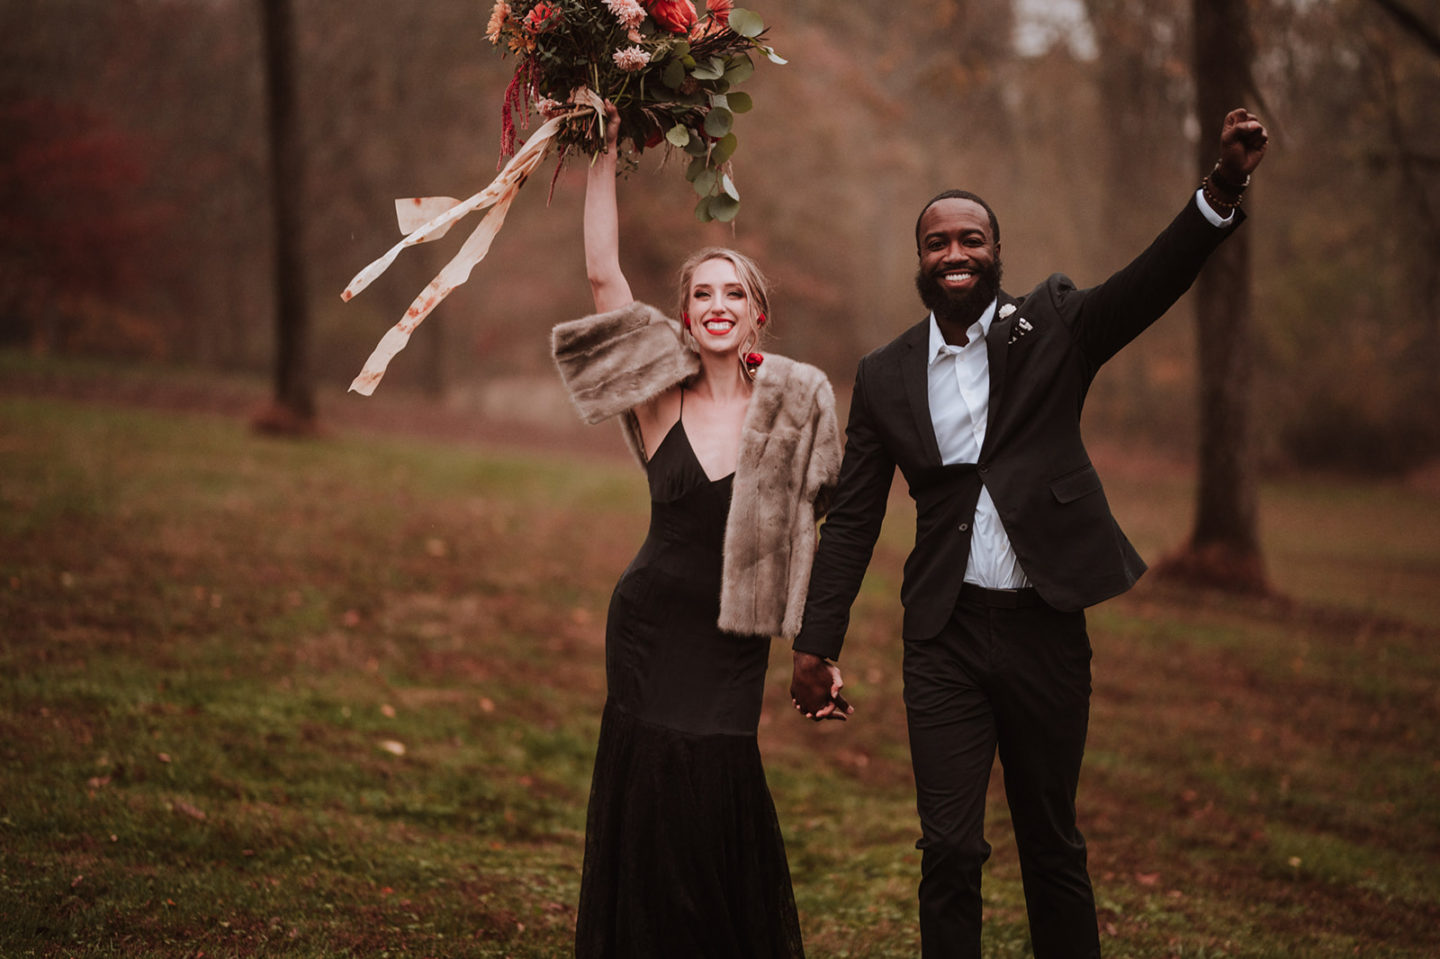 Boho Luxe Wedding With Country Vibes At Rockwood Estate, Virginia, USA